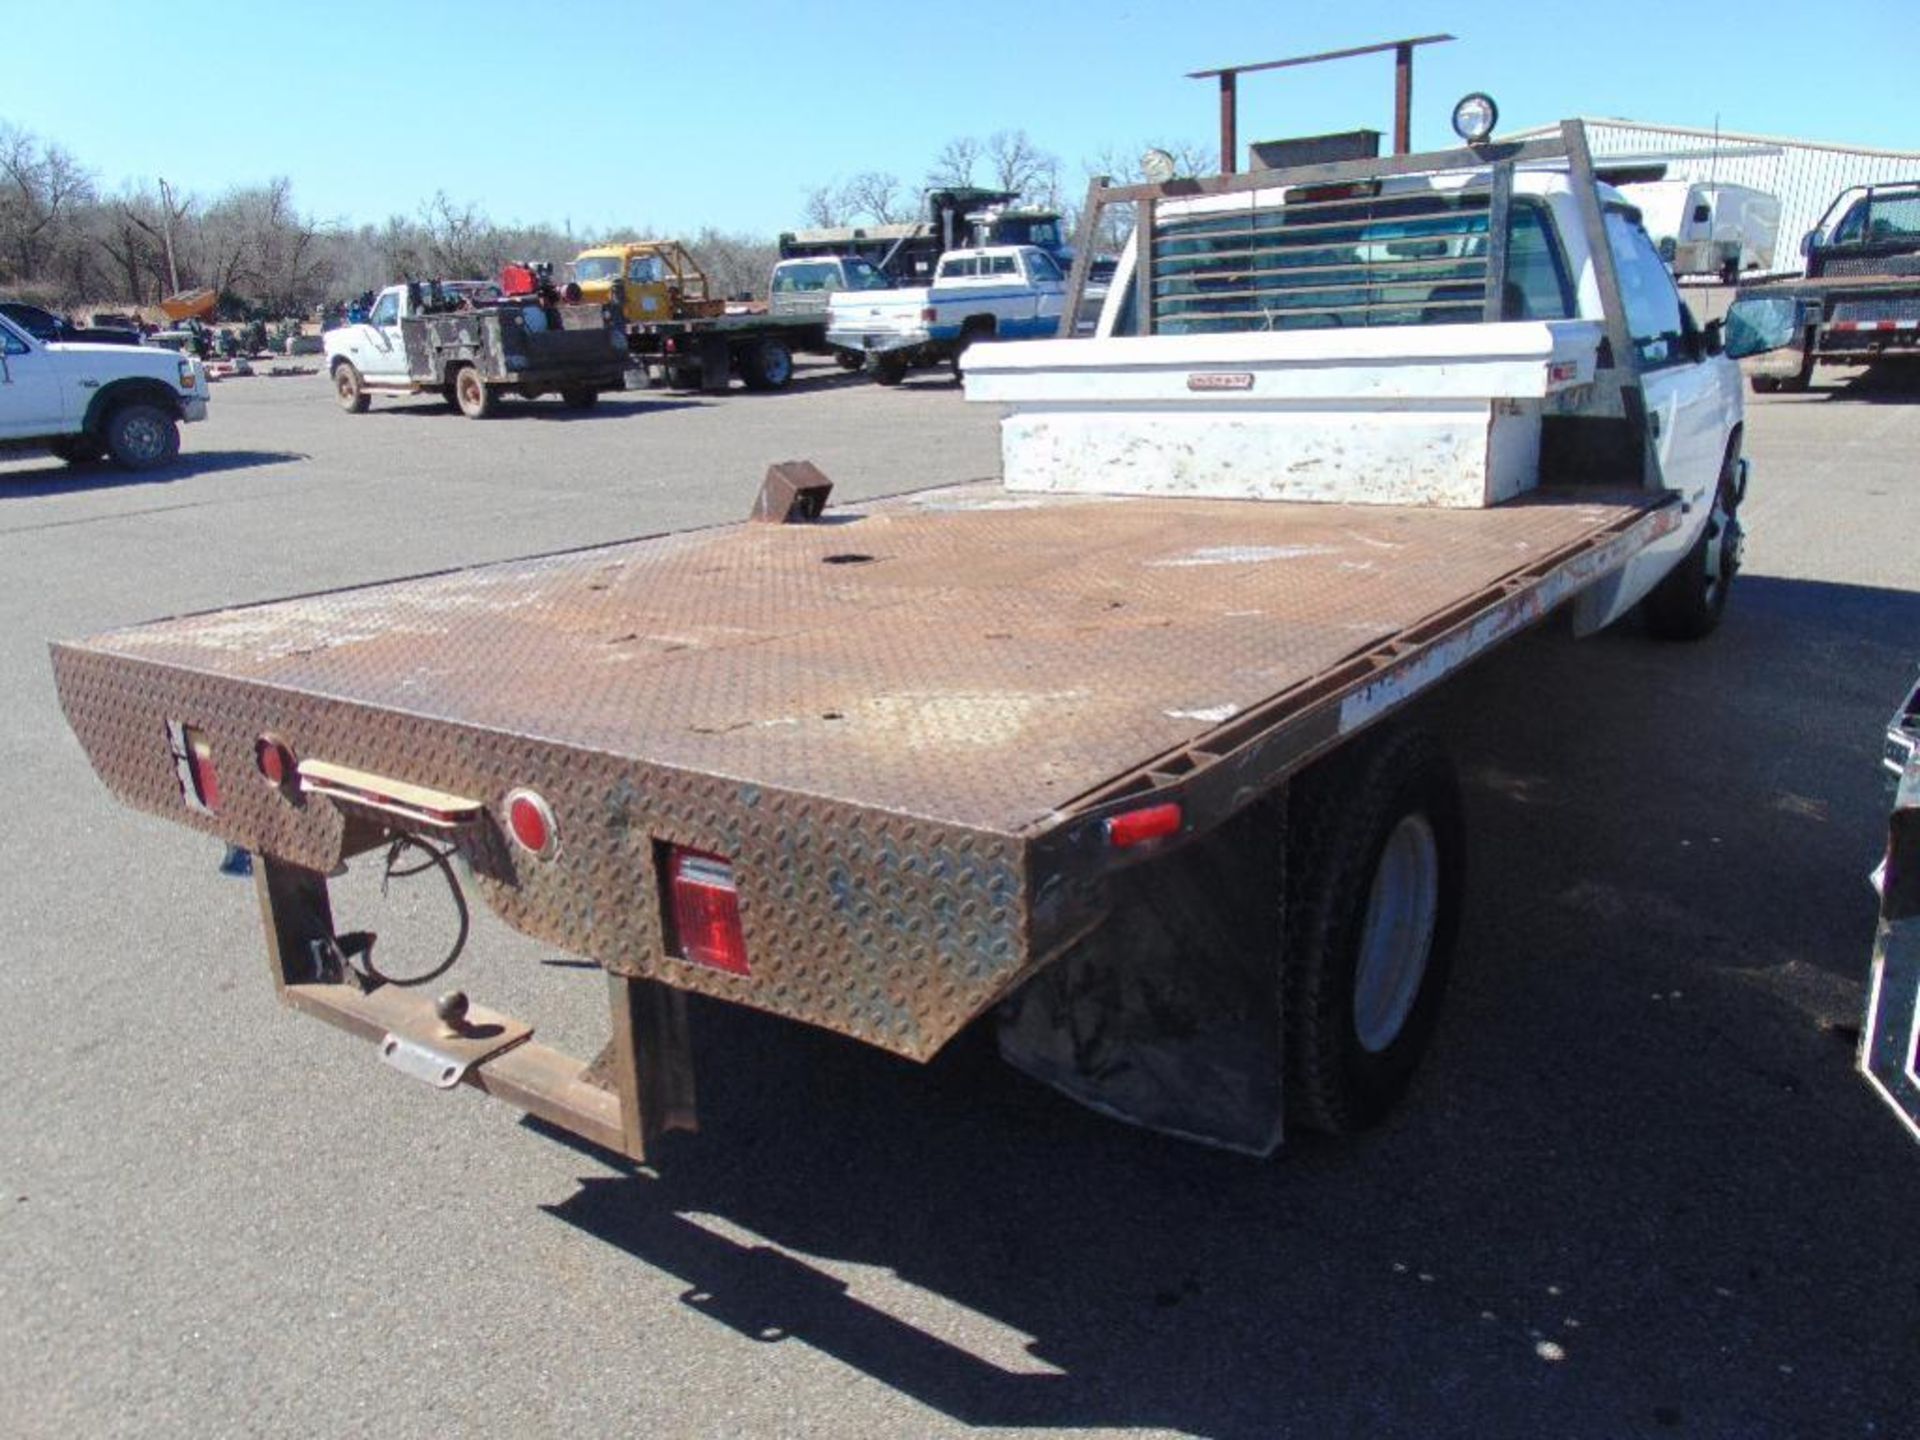 1997 Chevrolet 3500 Flatbed Truck s/n 1gbjc34j1vf018323, v8 eng, auto trans ,od reads 181092 miles - Image 3 of 6